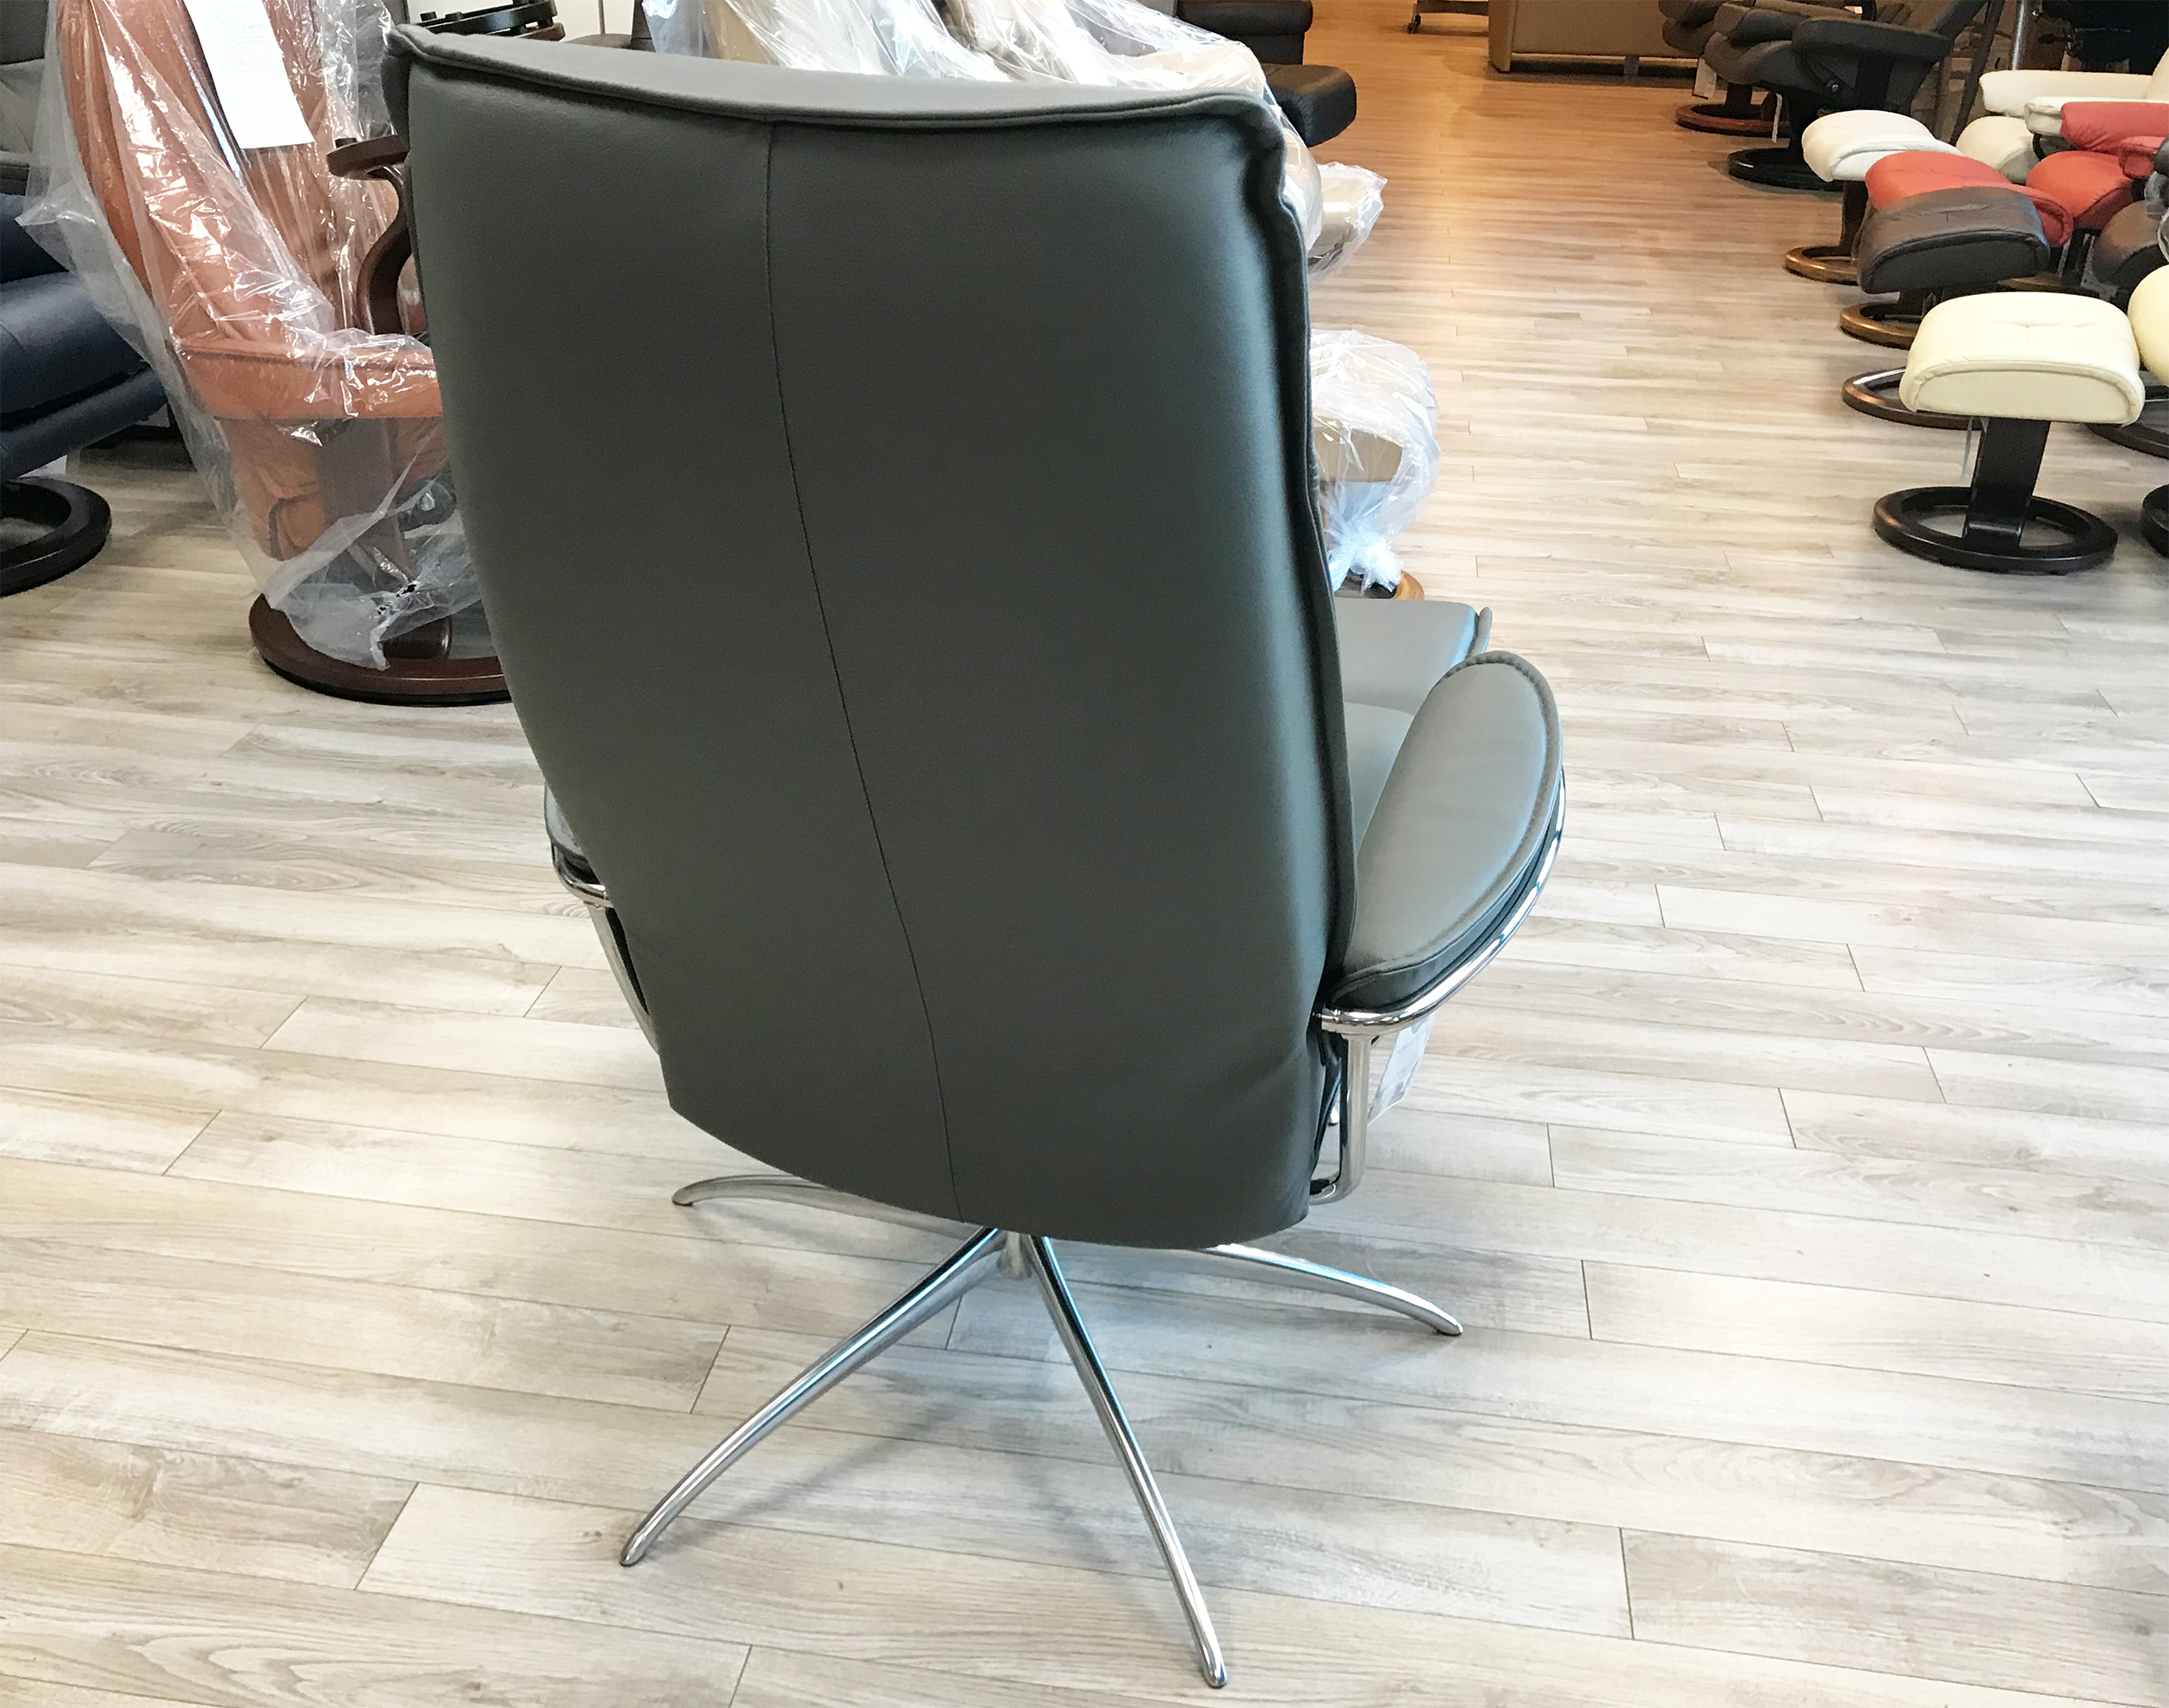 Back - City City Grey Stressless High Leather Batick Batick Grey Leather Back Recliners Stressless by High Ekornes Chairs